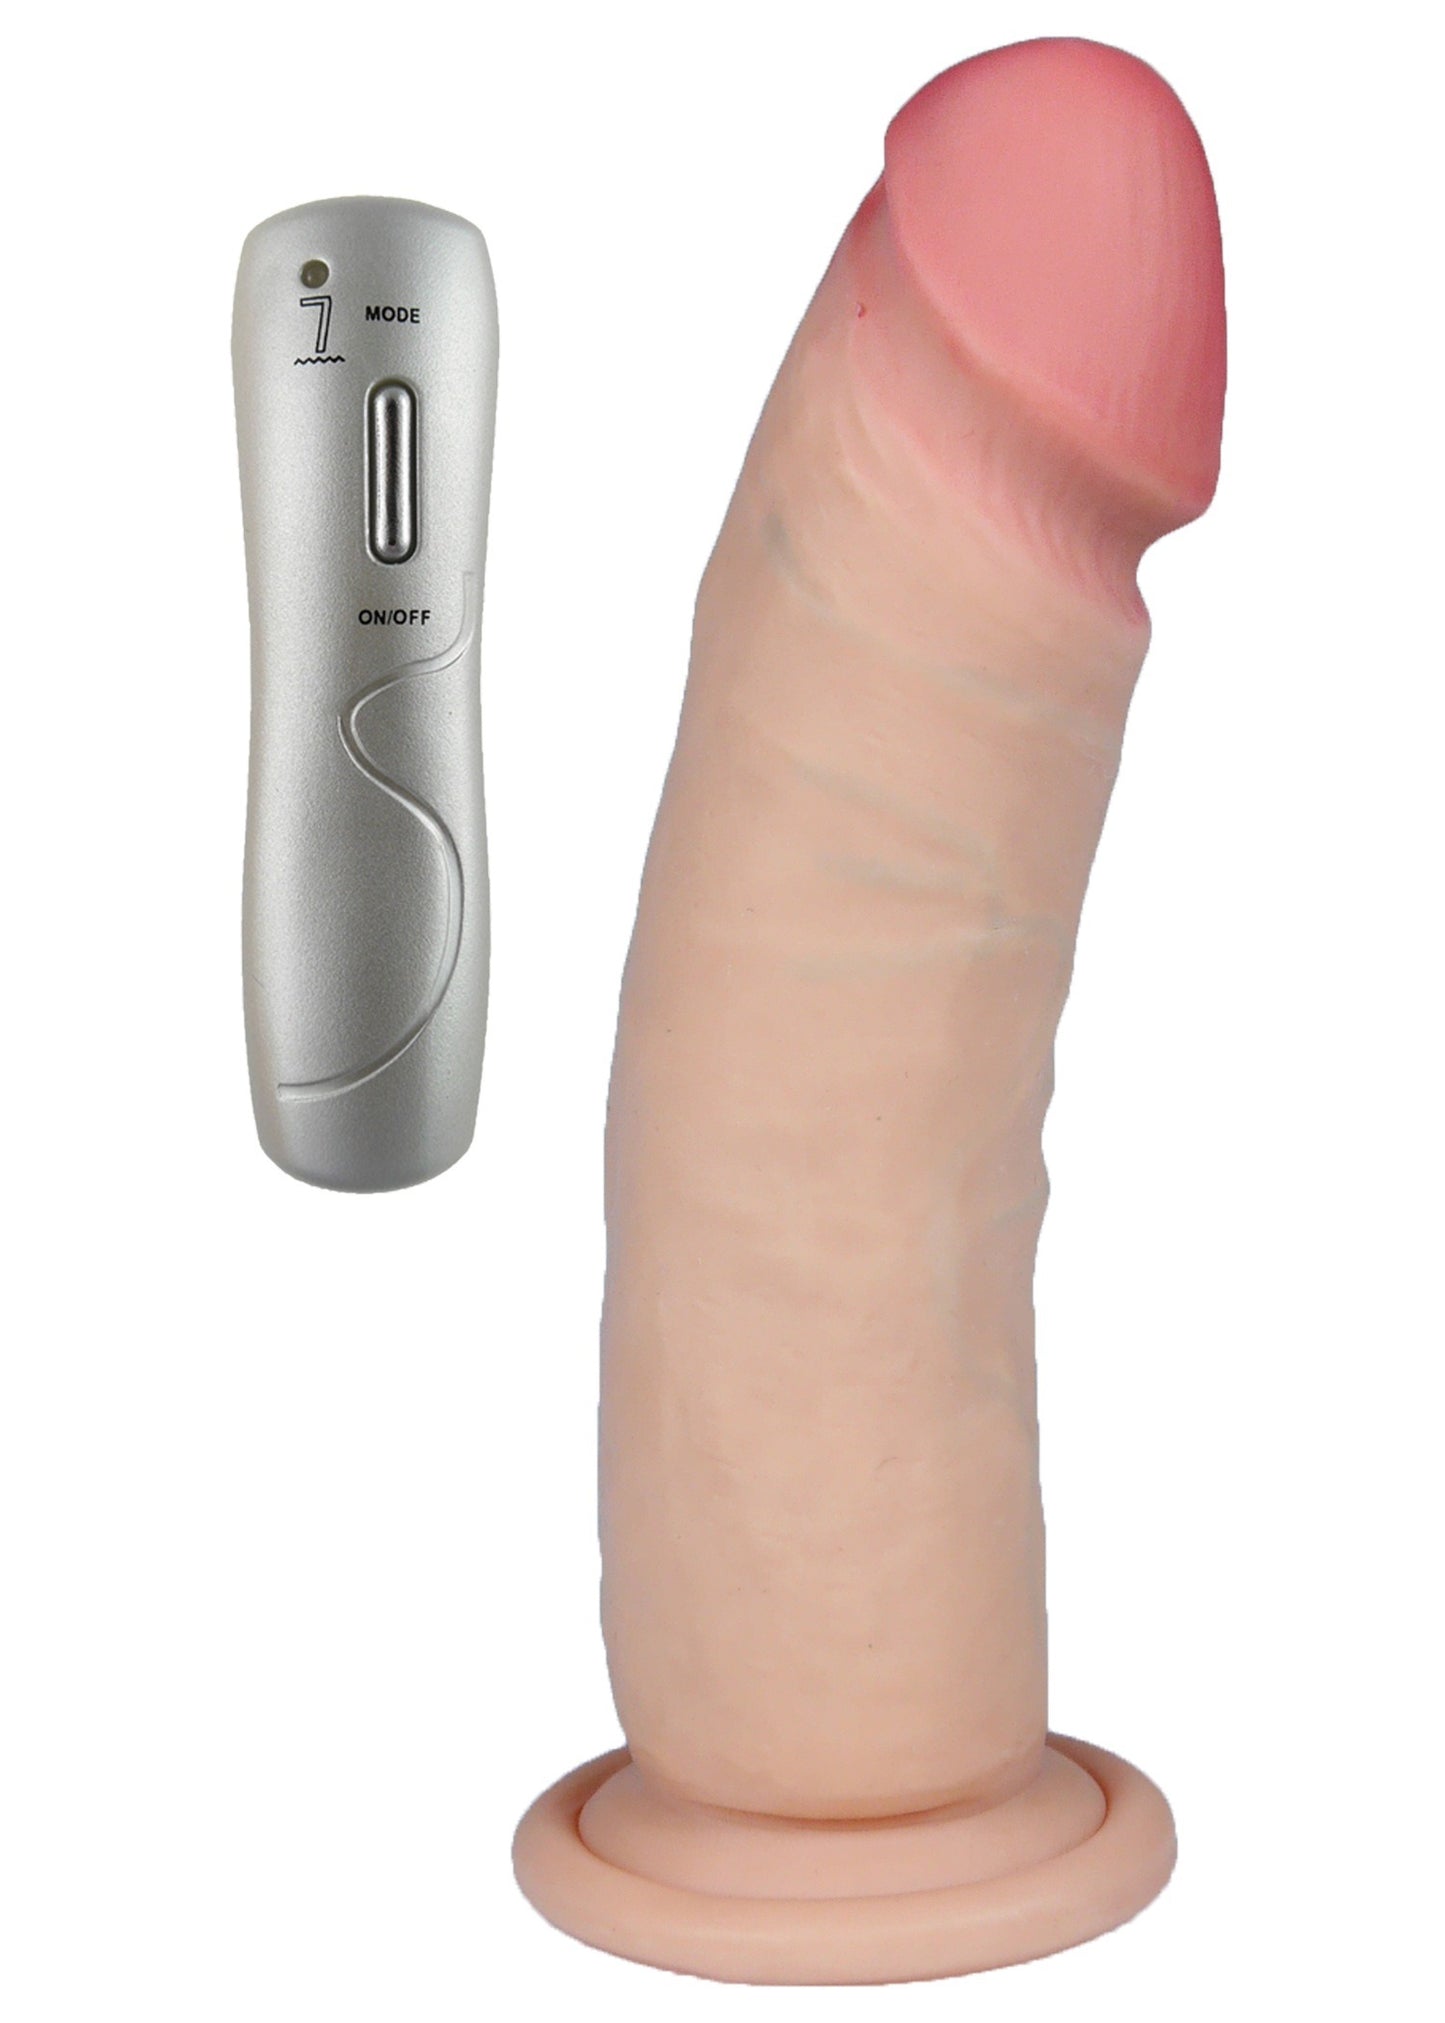 Bossoftoys Boreasz Loveclonex Ultra Realistic Vibrator - Cyber skin feels like real - Better then Silicone - 5-7 cm thick - Suction Cup - 7 inch / 17.5 cm - 21-00028